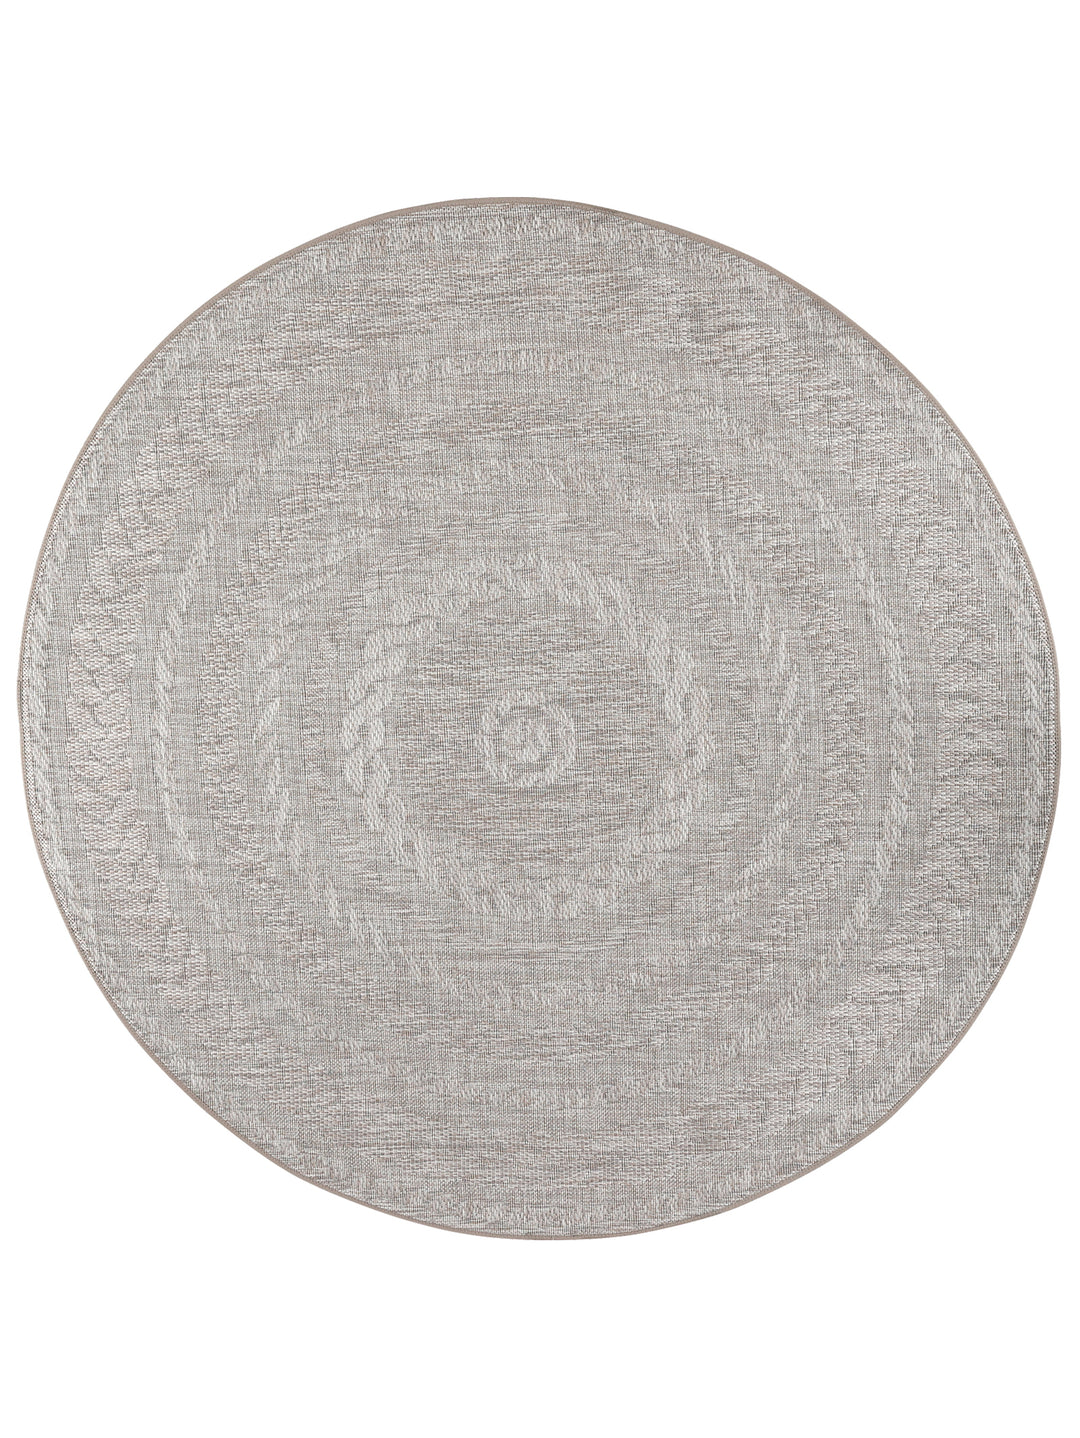 Whirlpool Outdoor Round Rug in Feather